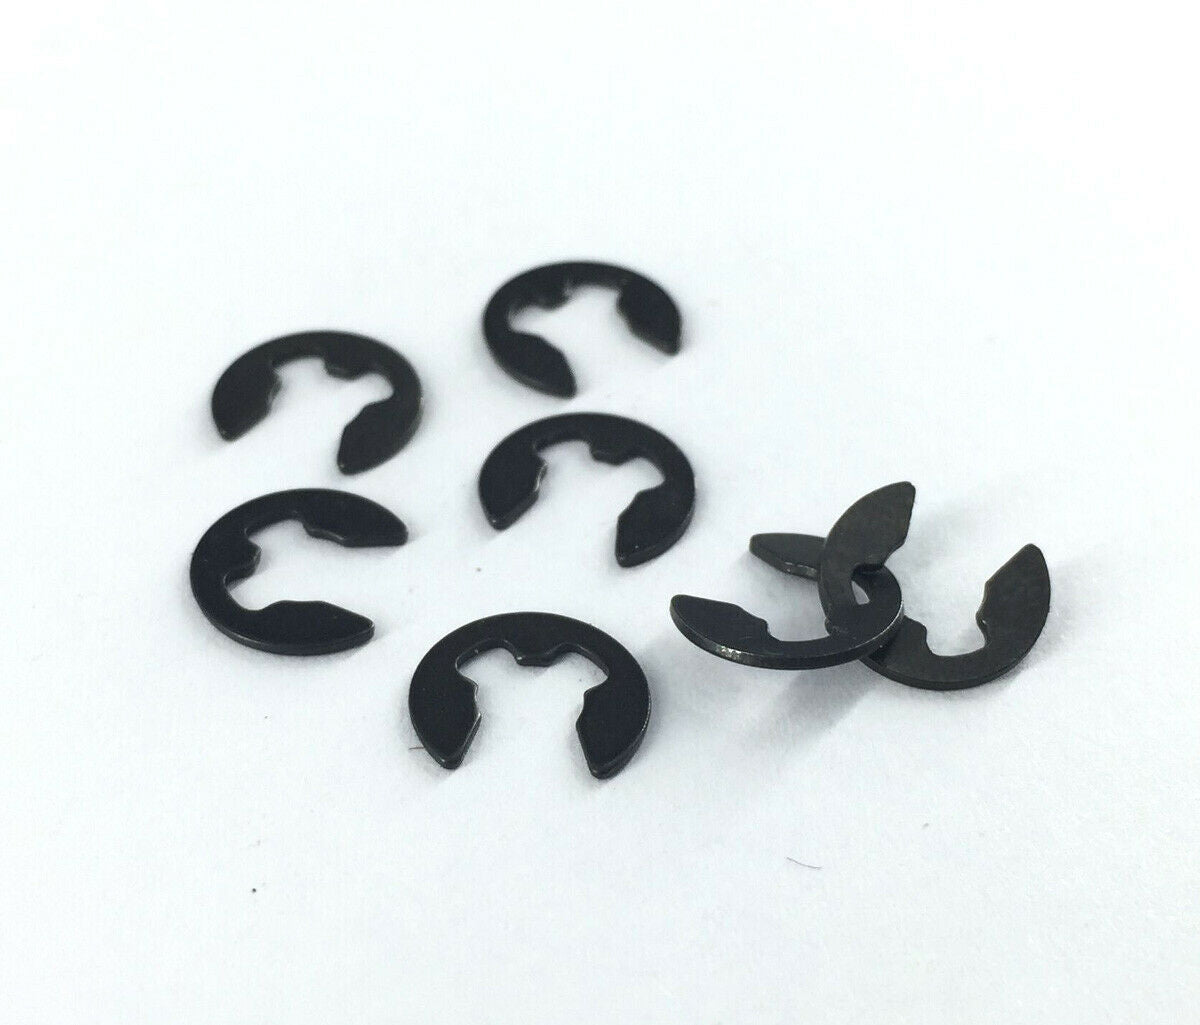 100pcs 5mm Stainless Steel E-Clip / Snap Ring / Circlip [M_M_S]